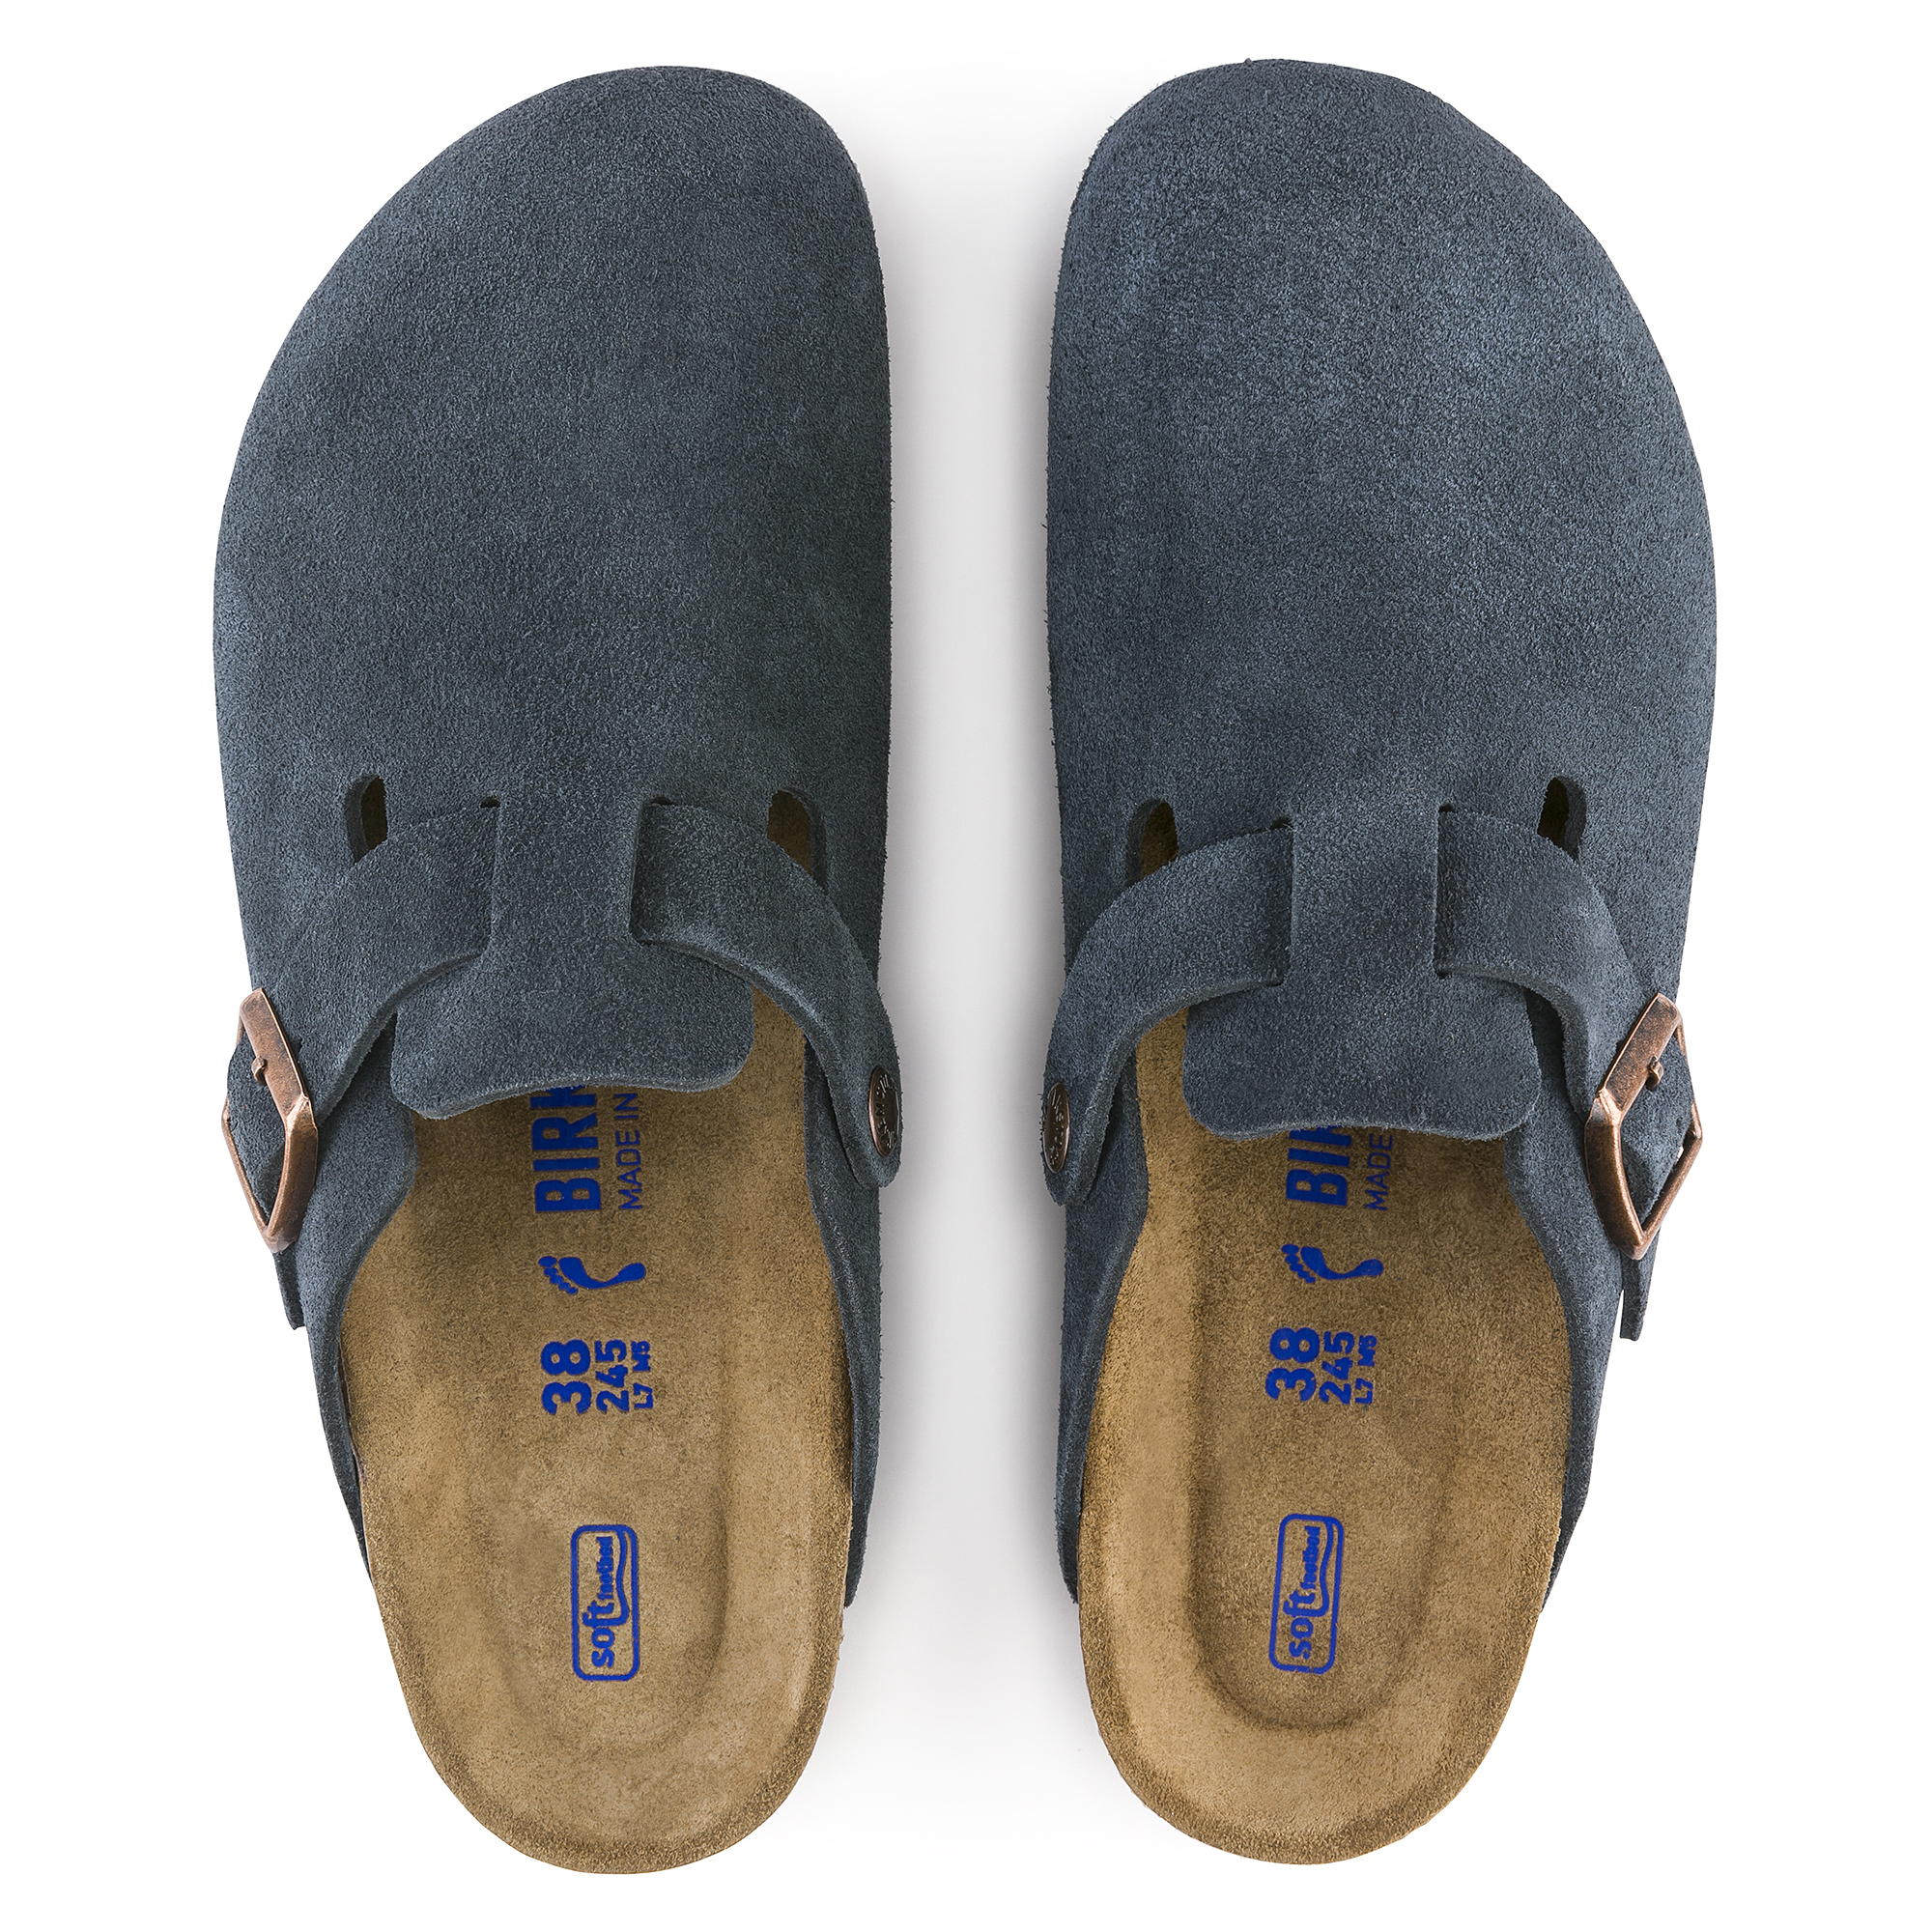 Boston Suede Leather Navy | shop online 